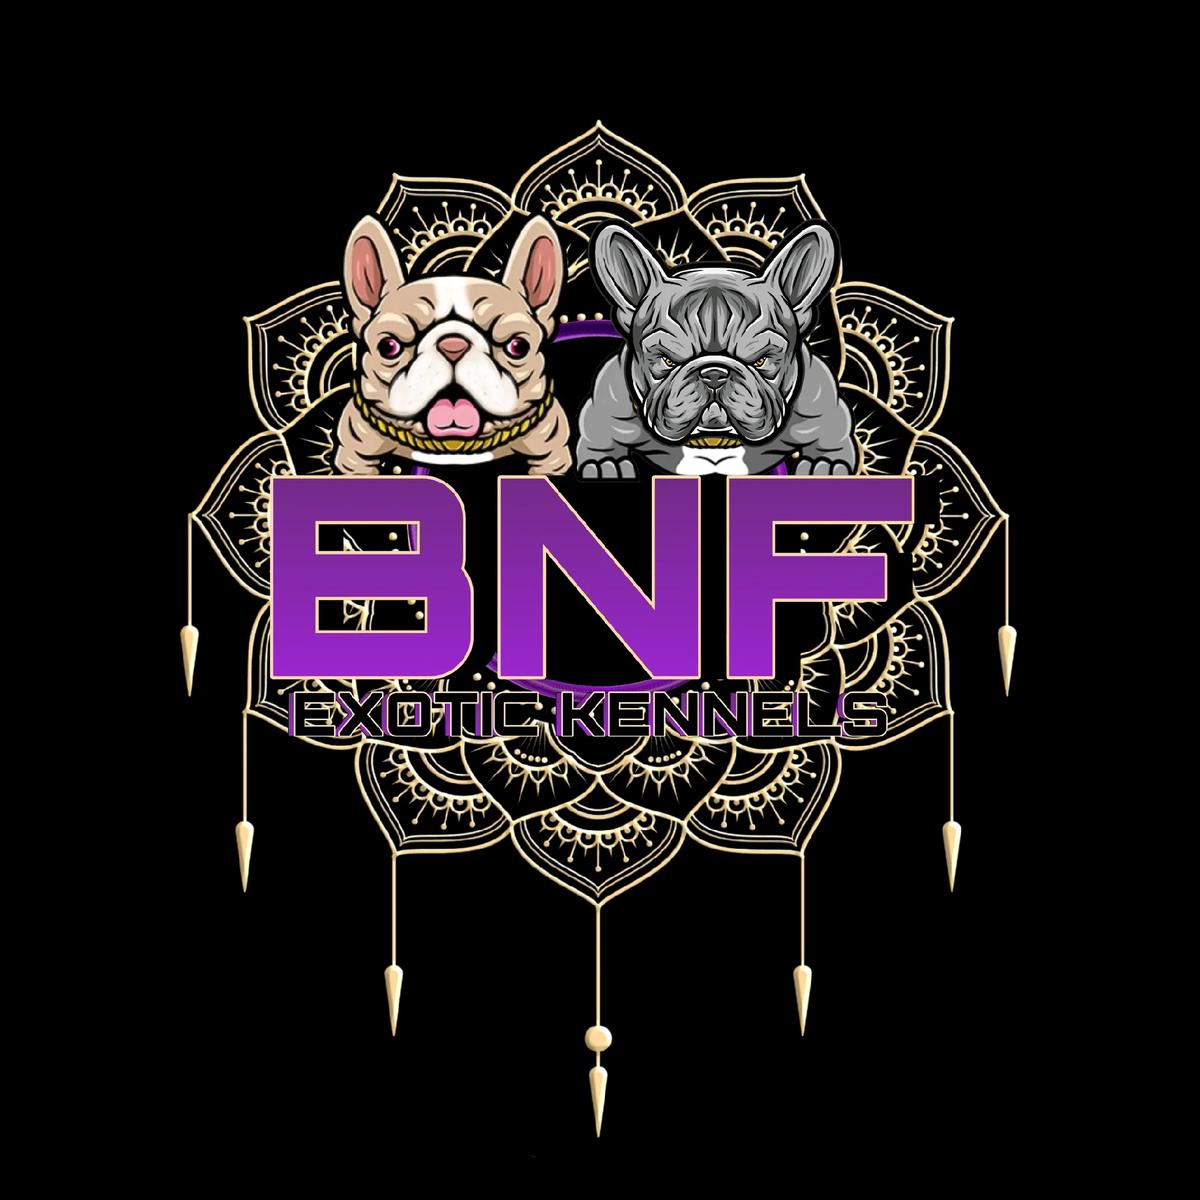 BNFEXOTICKENNEL's images